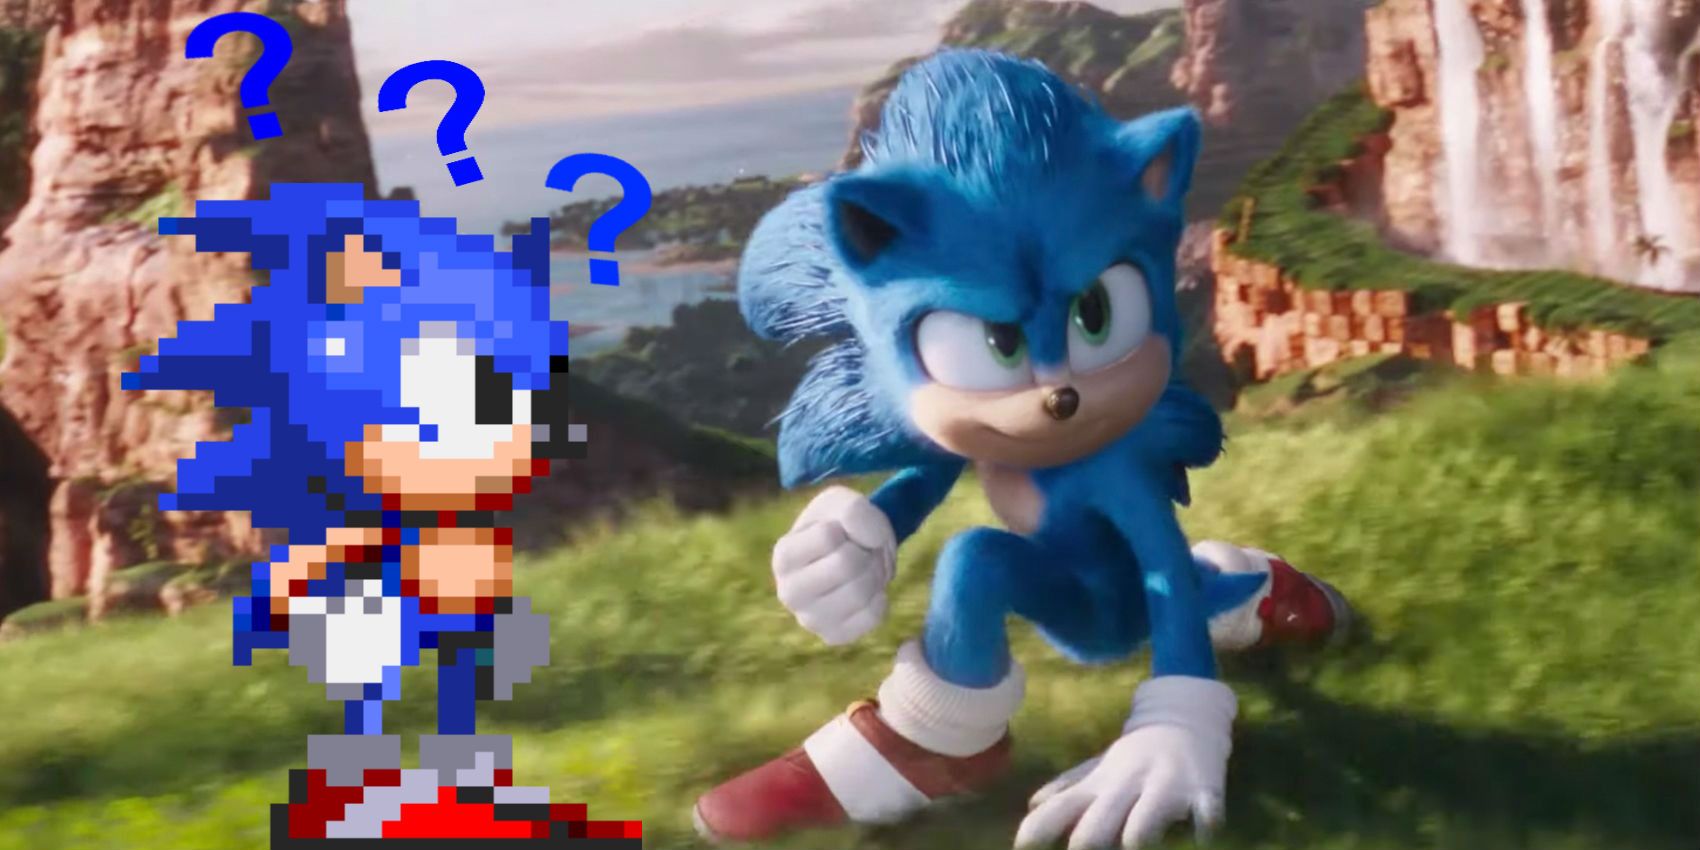 What's the REAL Origin of Sonic the Hedgehog?